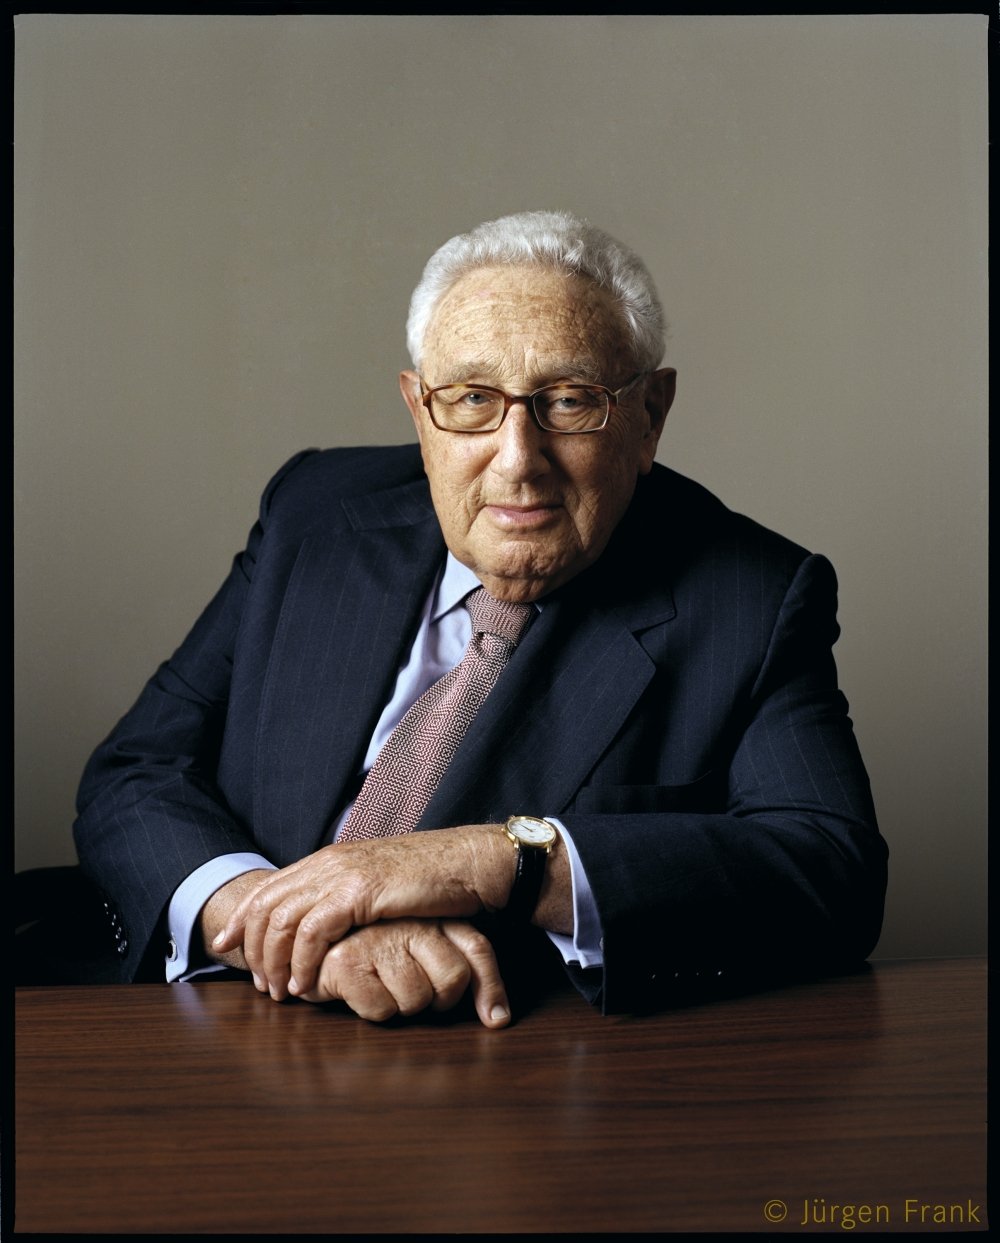 Kissinger Institute hosts Senior Dialogue with Dr. Henry A. Kissinger and Chairman Zheng Bijian